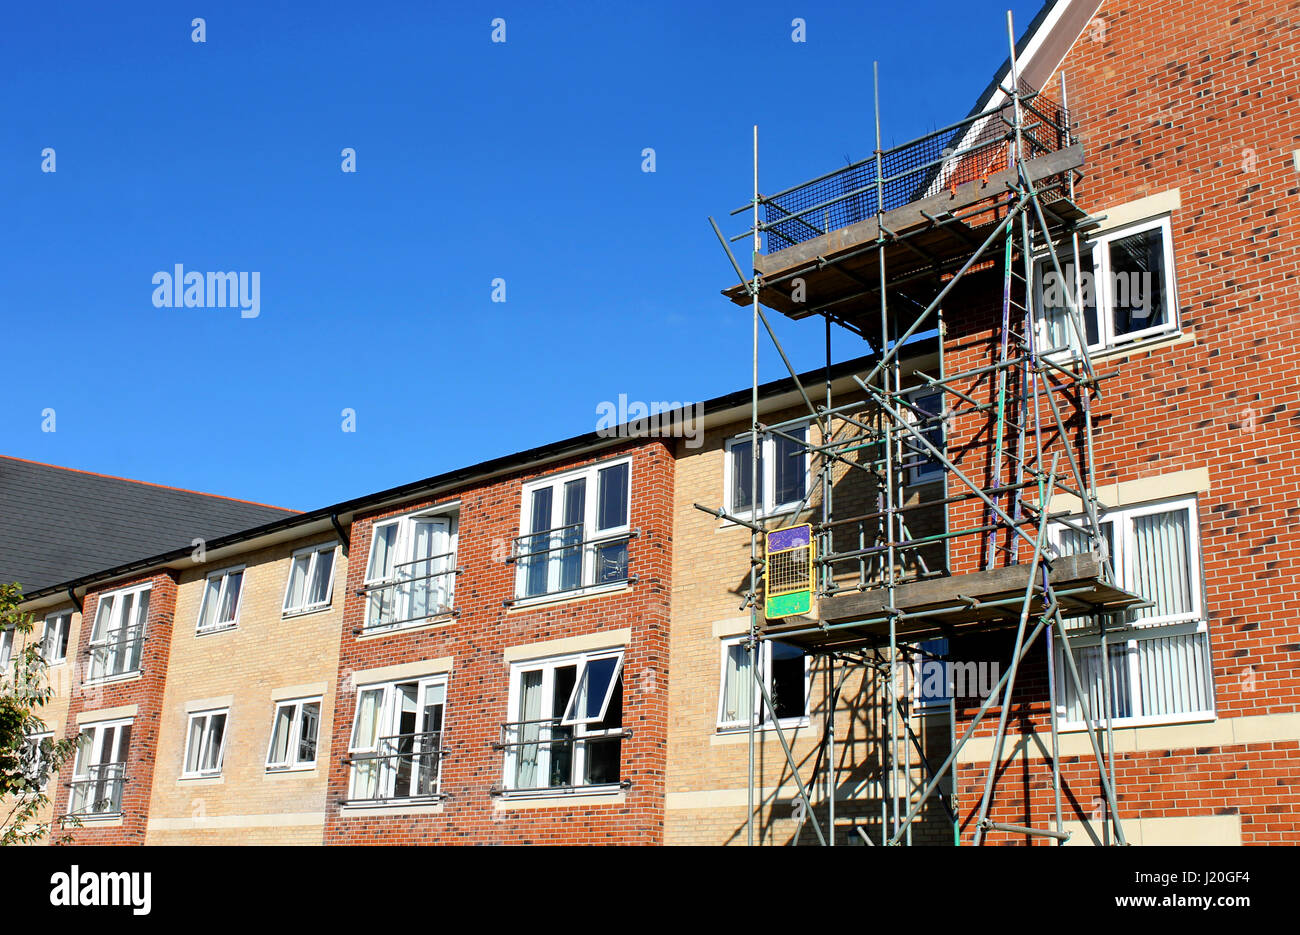 EASTFIELD, SCARBOROUGH, NORTH YORKSHIRE, ENGLAND - 10th of October 2016: Scaffolding on exterior of modern commercial building on 10th October 2016. Stock Photo